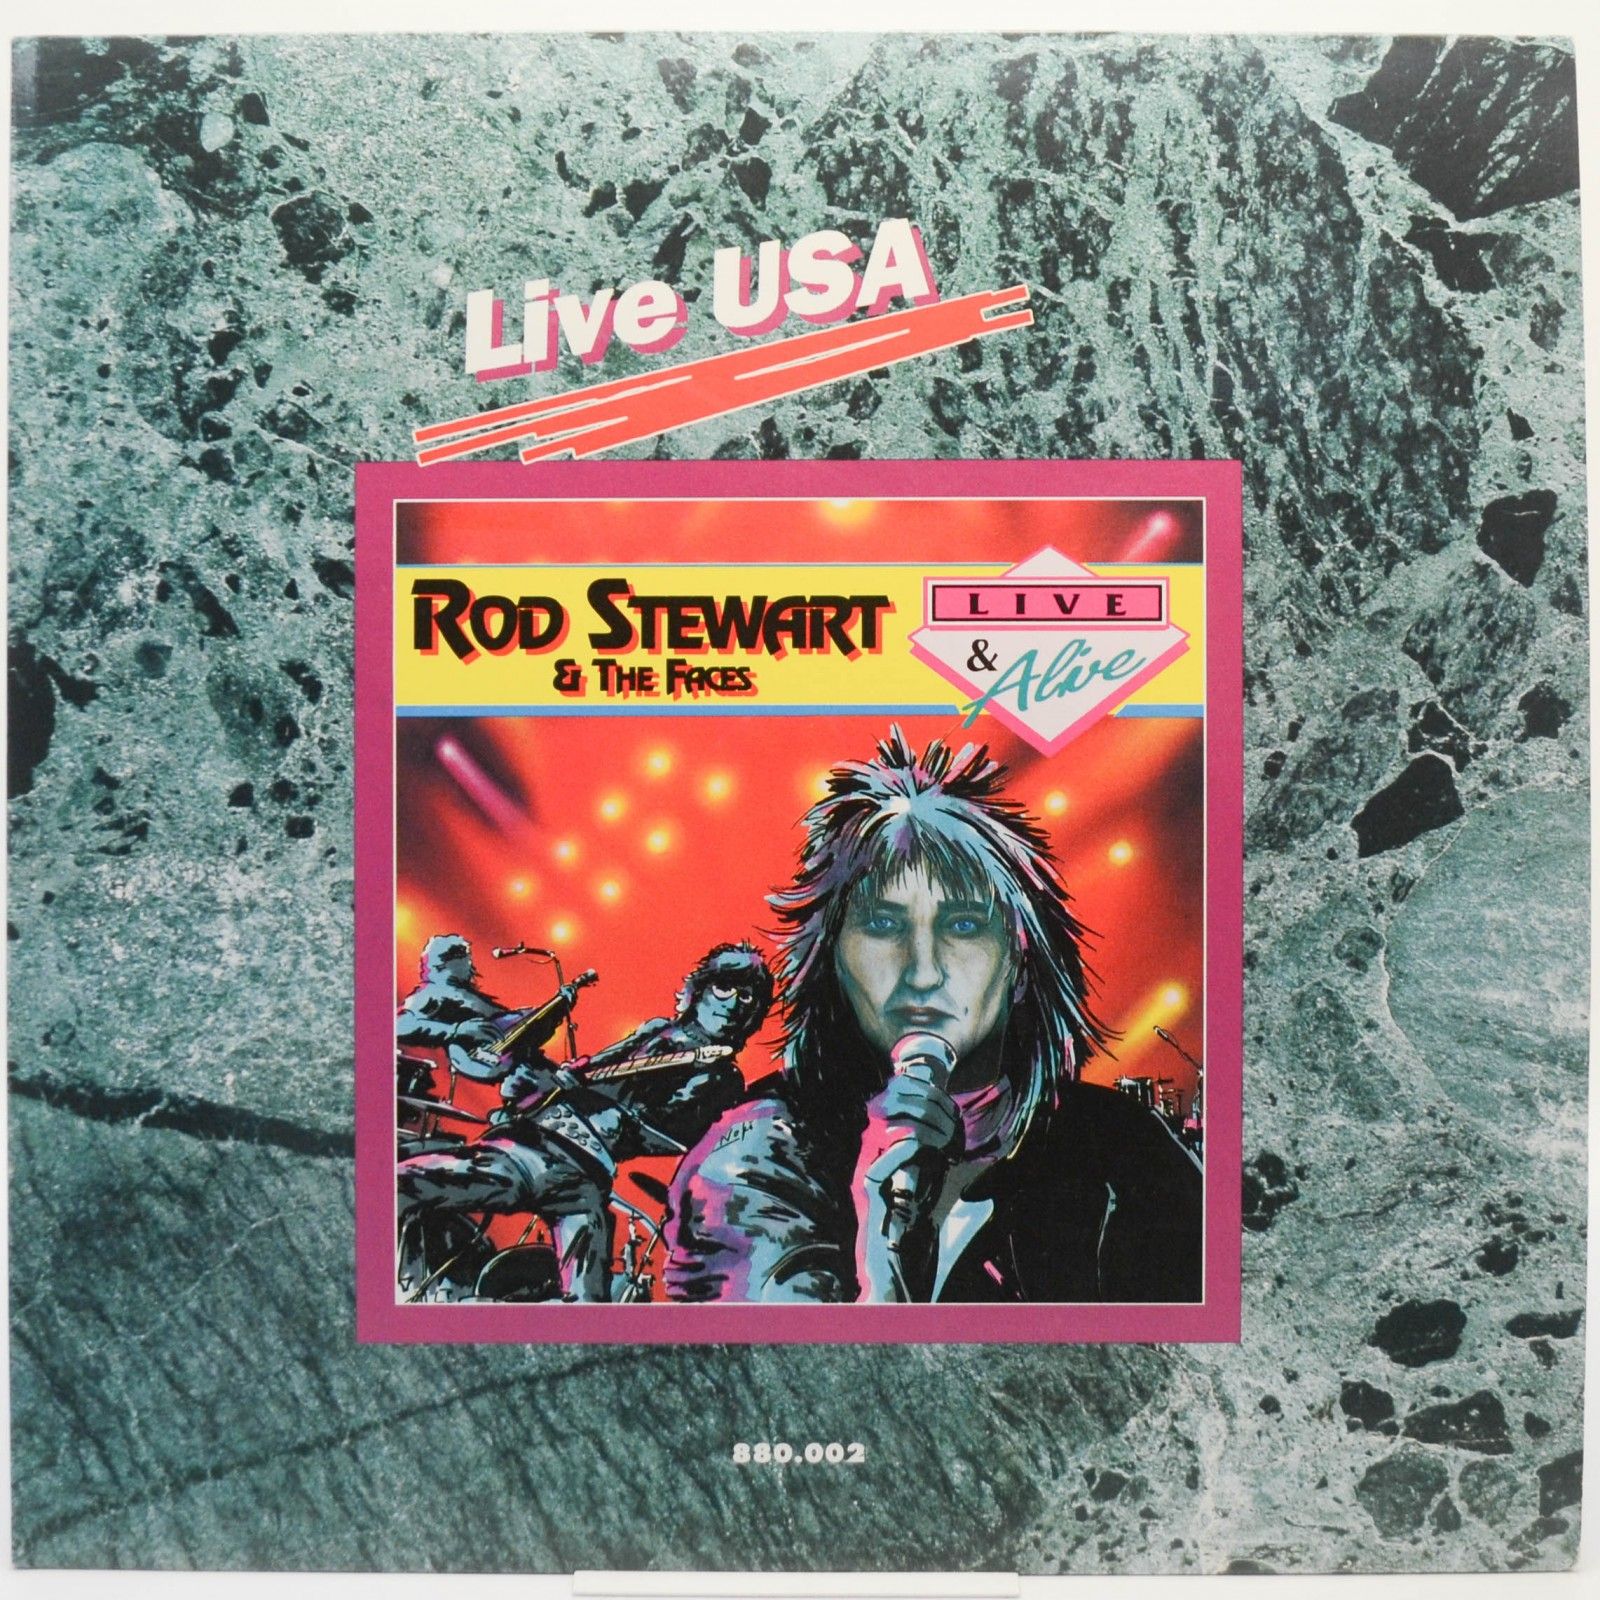 Rod Stewart & The Faces — Live USA, 1992